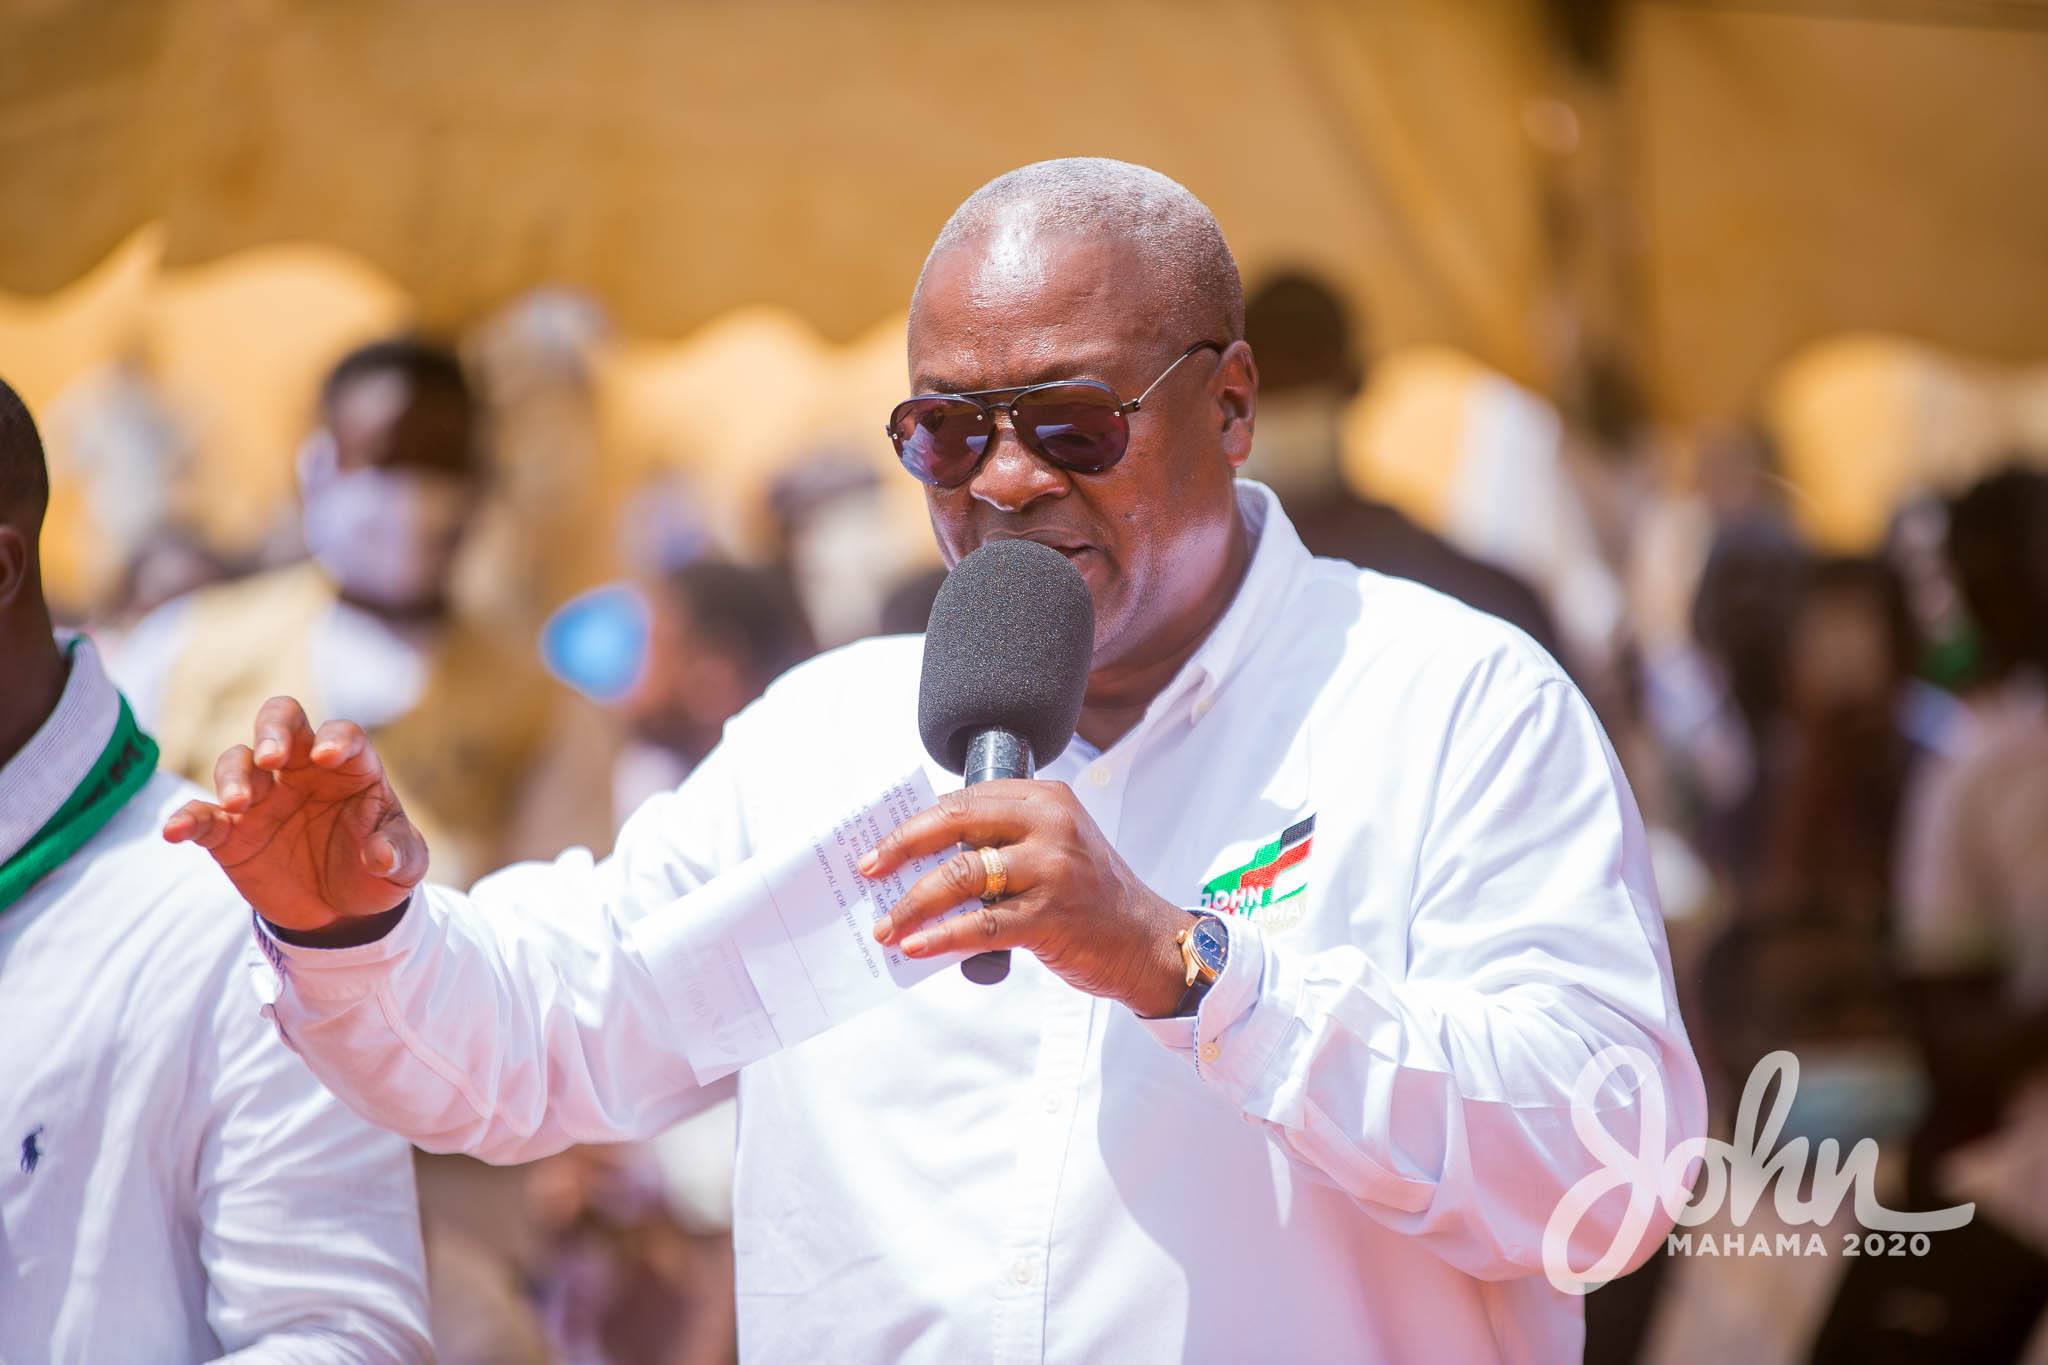 Mahama breaks his silence about Duffuor's injunction and withdrawal, saying "These things happen"